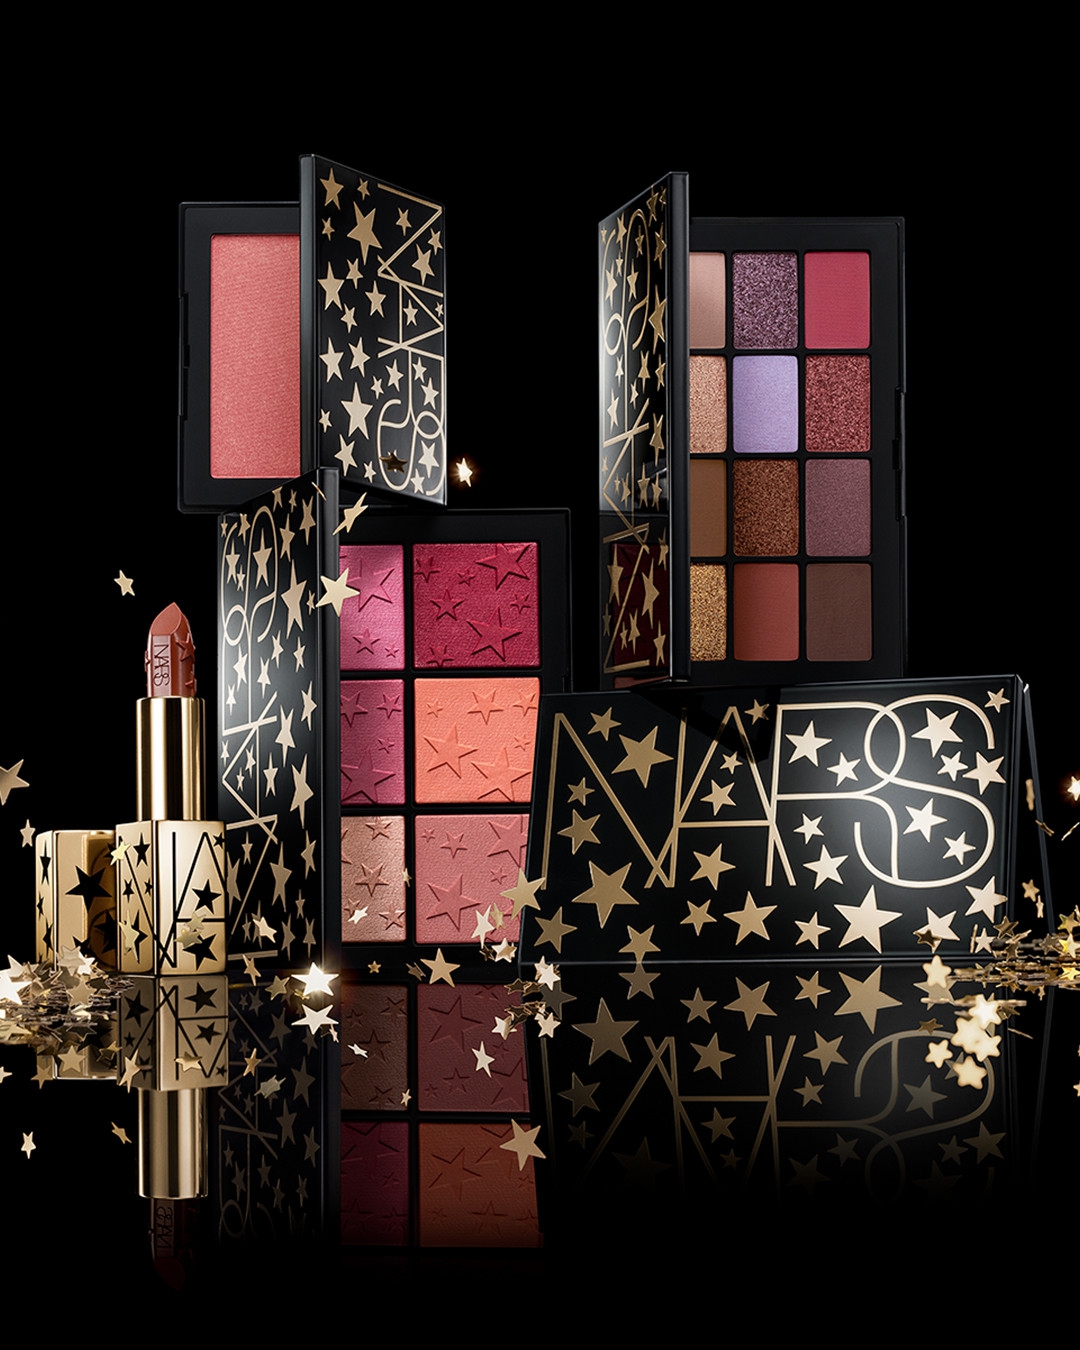 Nars Holiday Collection